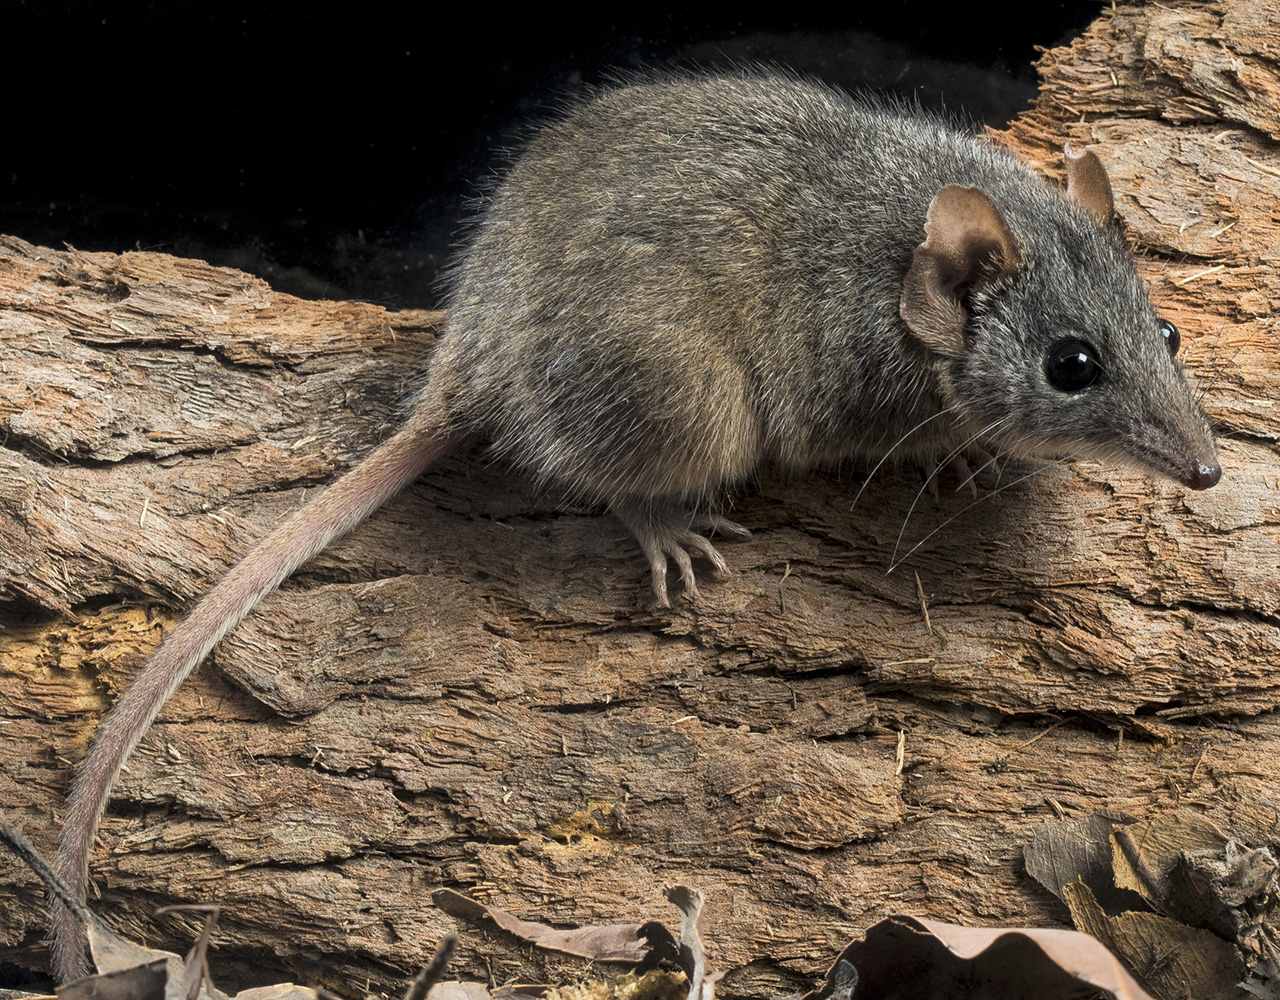 Moving mountains for the antechinus: The importance of food availability and high-elevation habitat